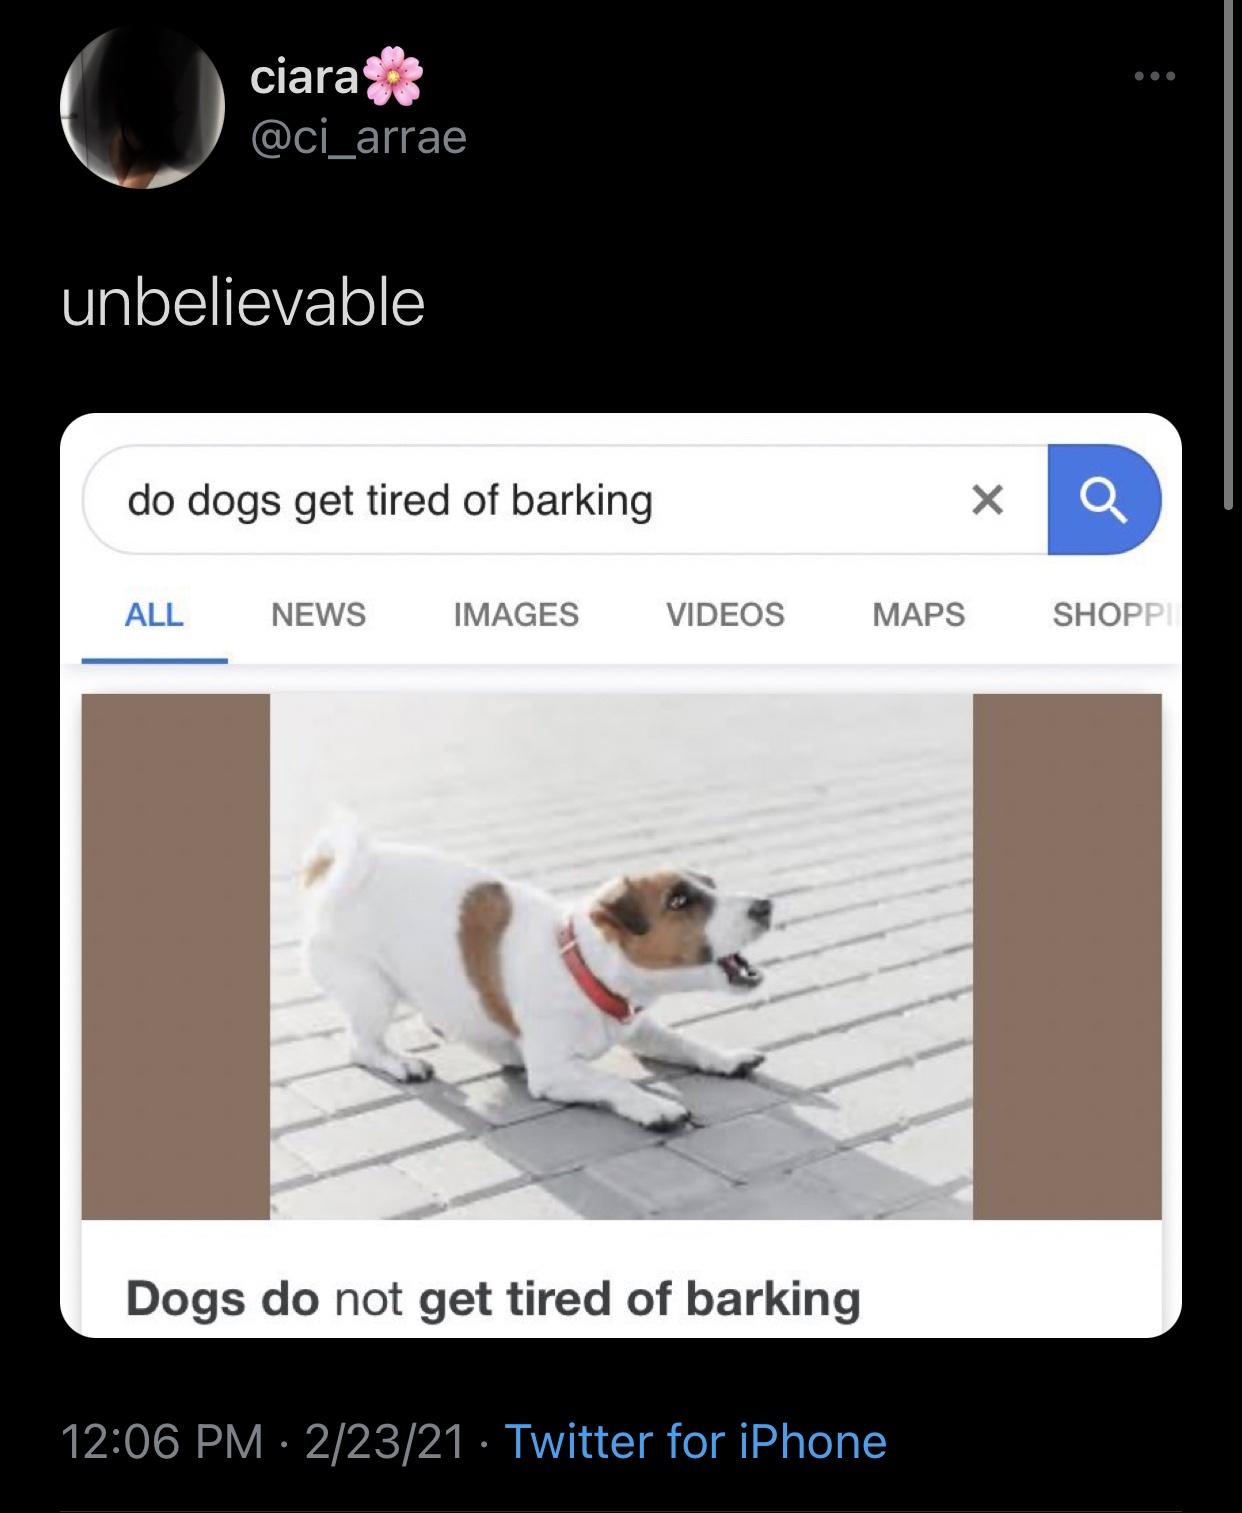 do dogs get tired of barking - o ciara unbelievable do dogs get tired of barking Q All News Images Videos Maps Shopp! Dogs do not get tired of barking 22321 Twitter for iPhone